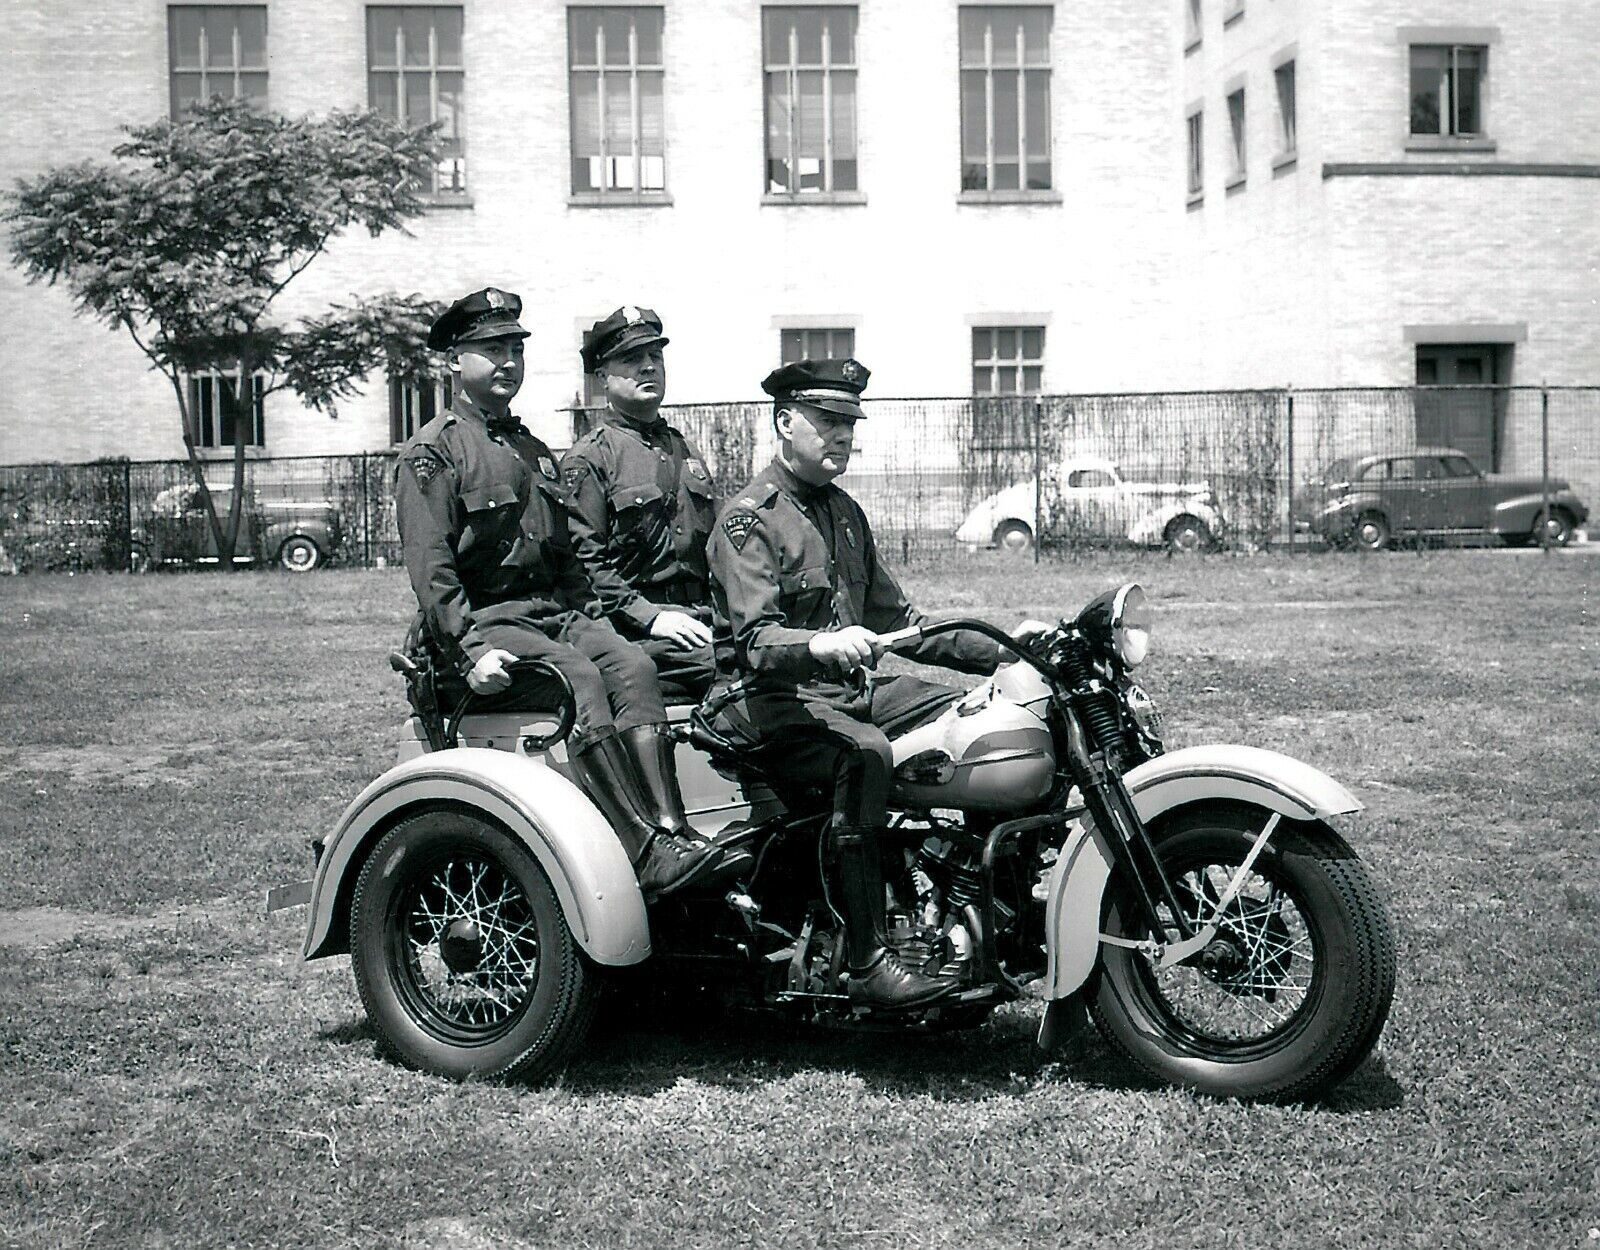 Vintage 40s 50s Motorcycle Police Photo Multi-Rider Old Cars